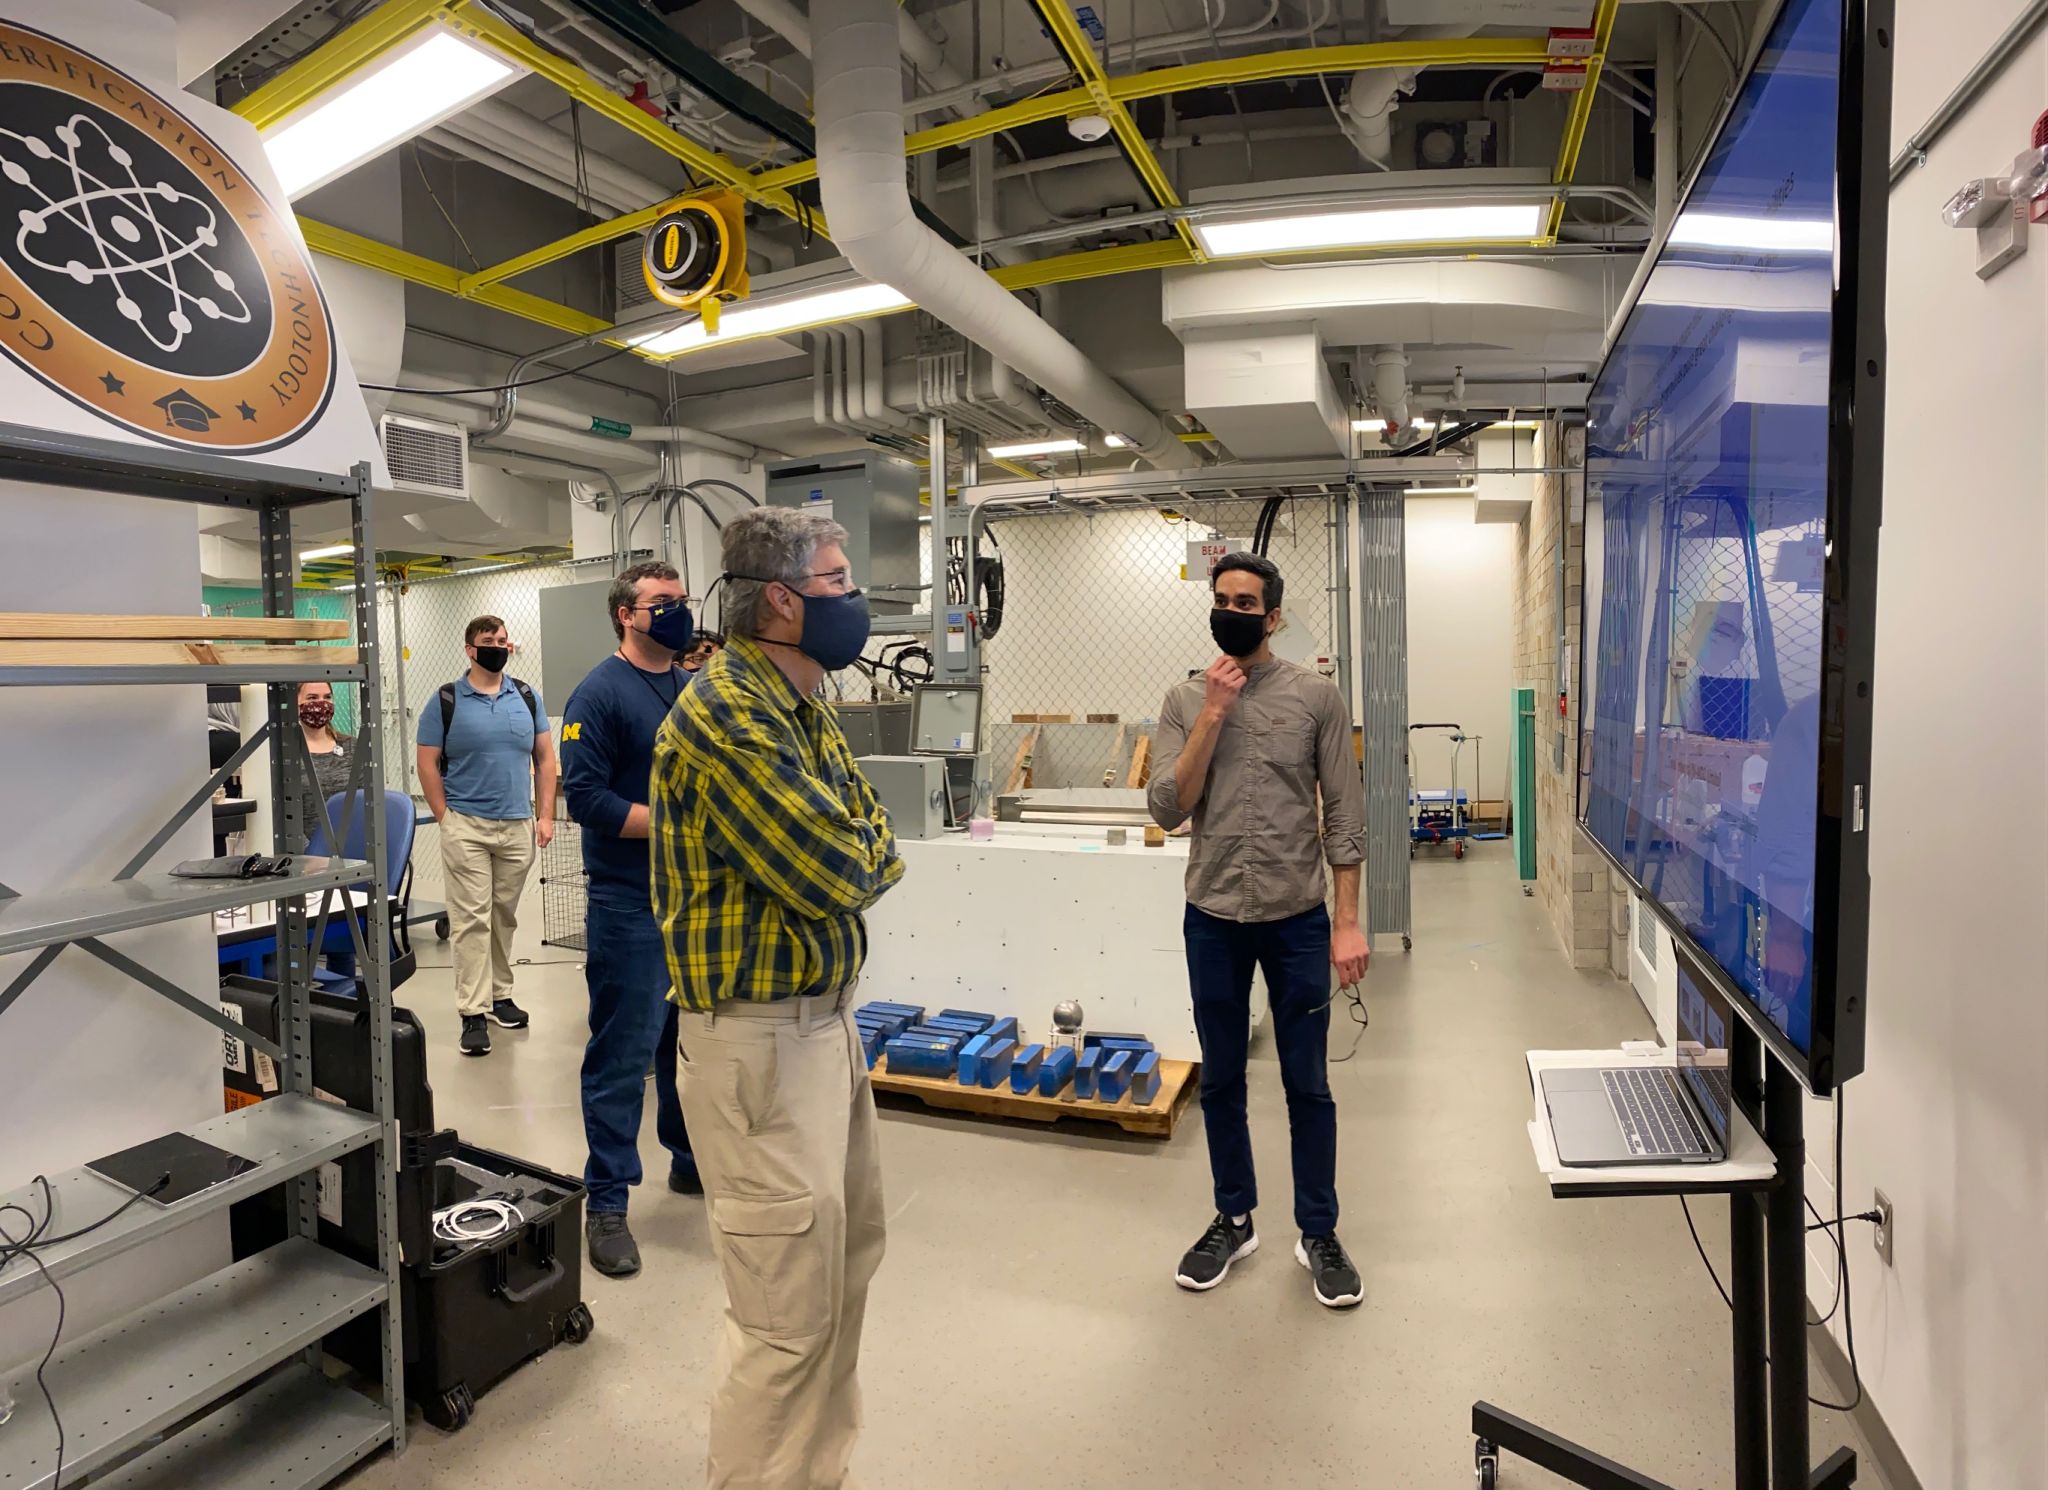 The lab's first in-person lab tour with Professor Emeritus Fred Becchetti of UM Physics